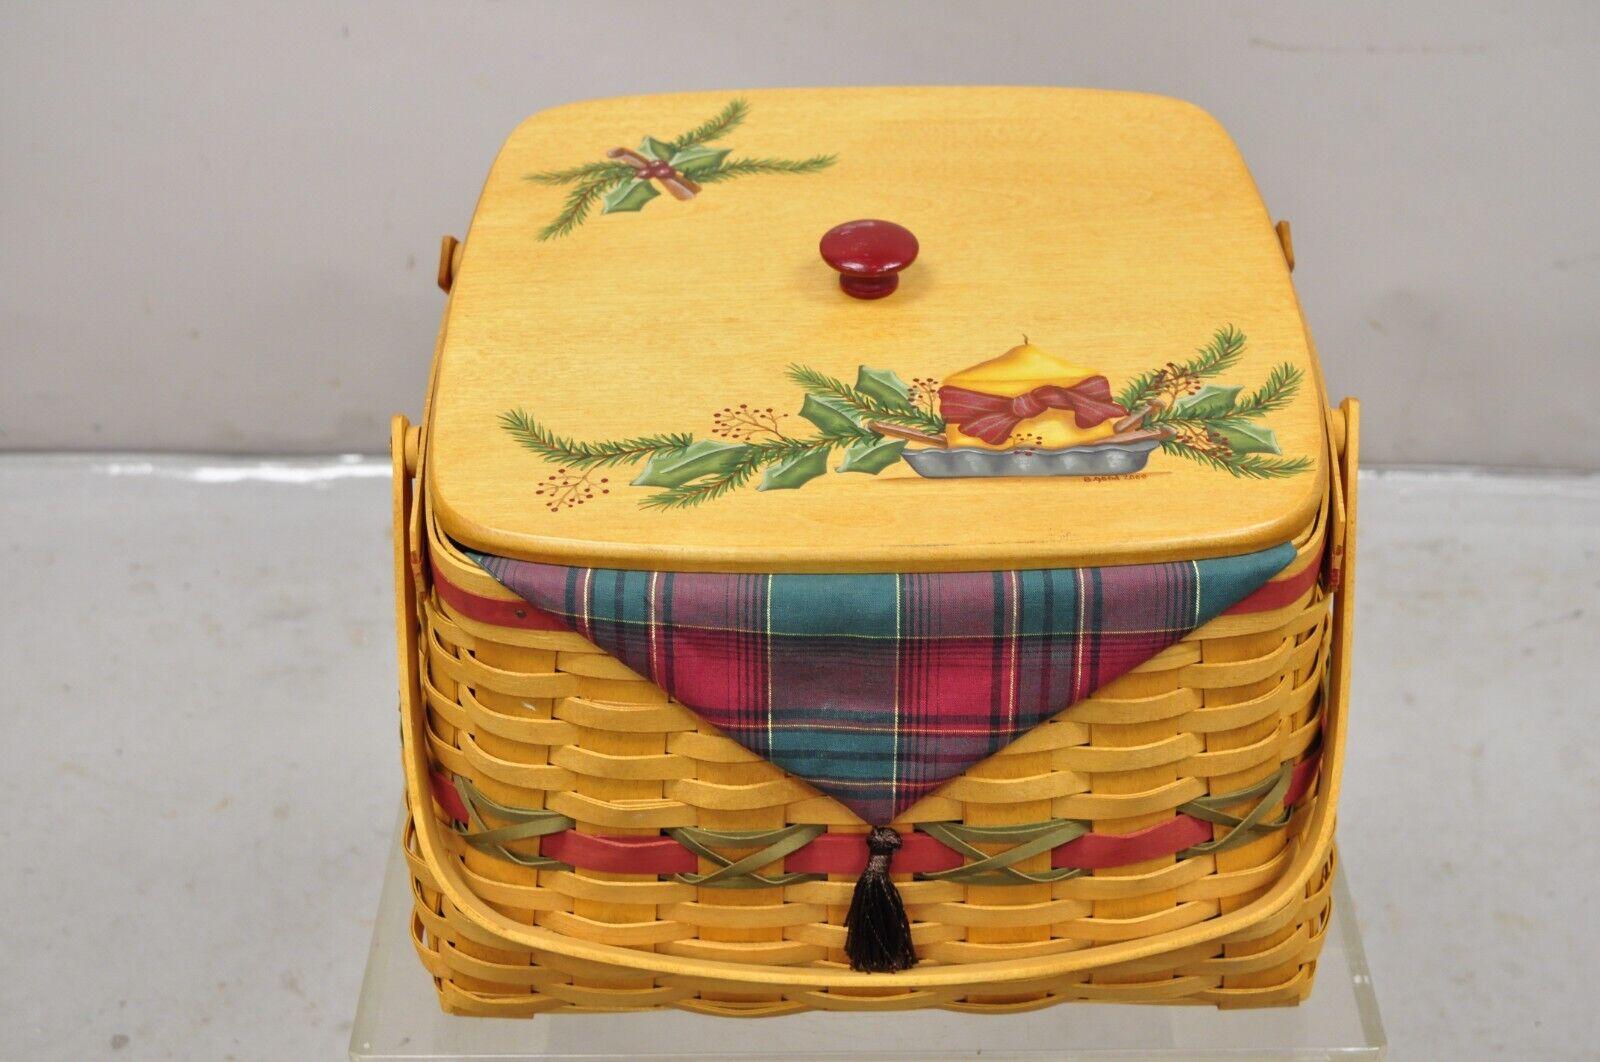 Vintage Longaberger 2000 Holiday Hostess 12 Days of Christmas Basket 17833 with Lid & Liners. Item featured Includes 3 plastic liners. Circa 2000. Measurements: 10